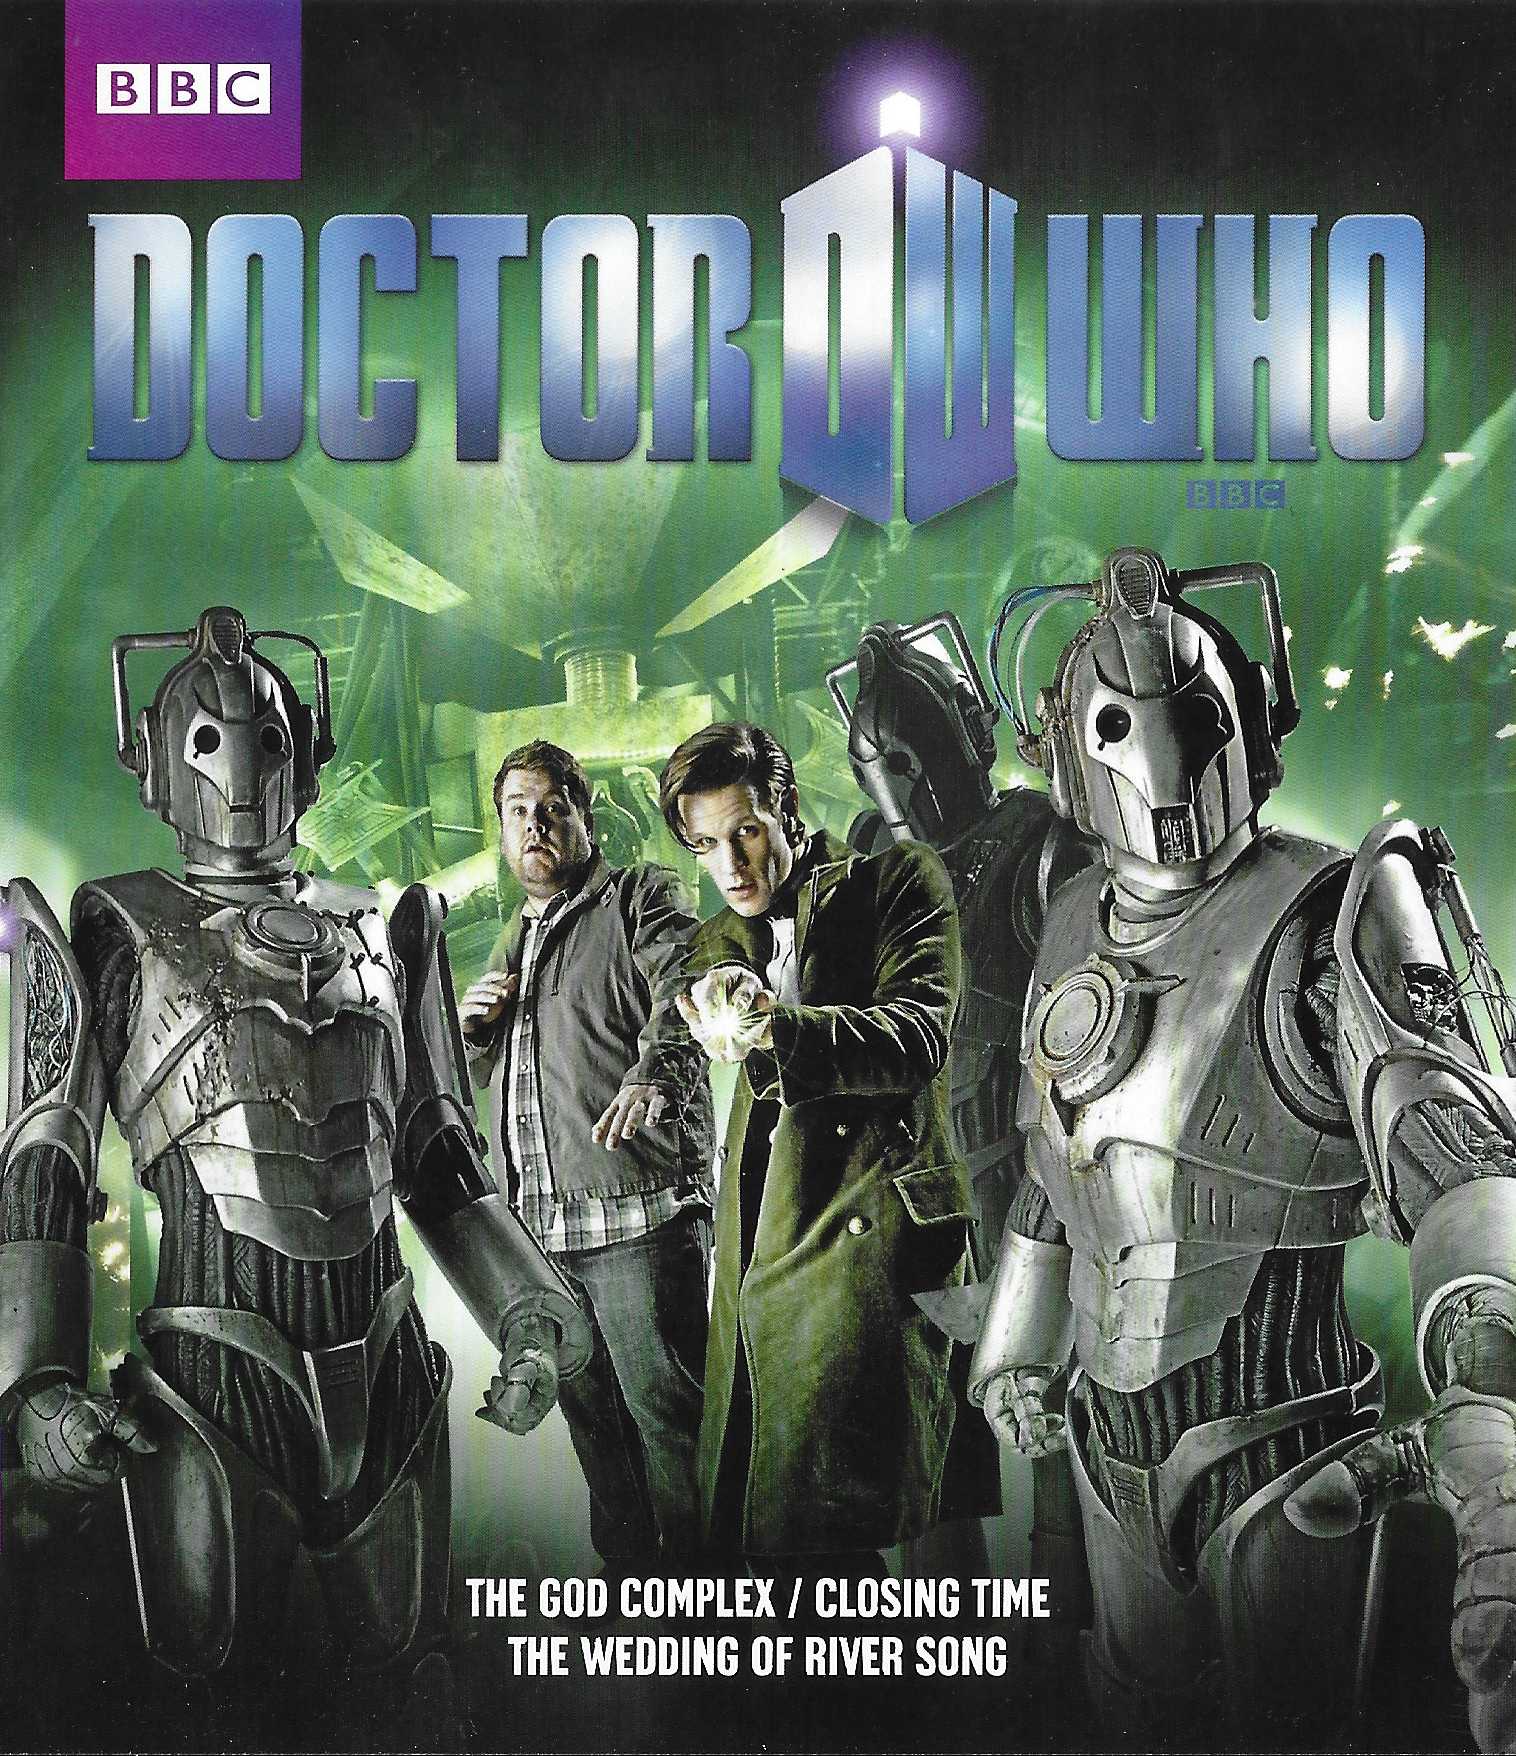 Picture of BBCBD 0152B Doctor Who - Series 6, part 2b by artist Toby Whithouse / Gareth Roberts / Steven Moffat from the BBC records and Tapes library